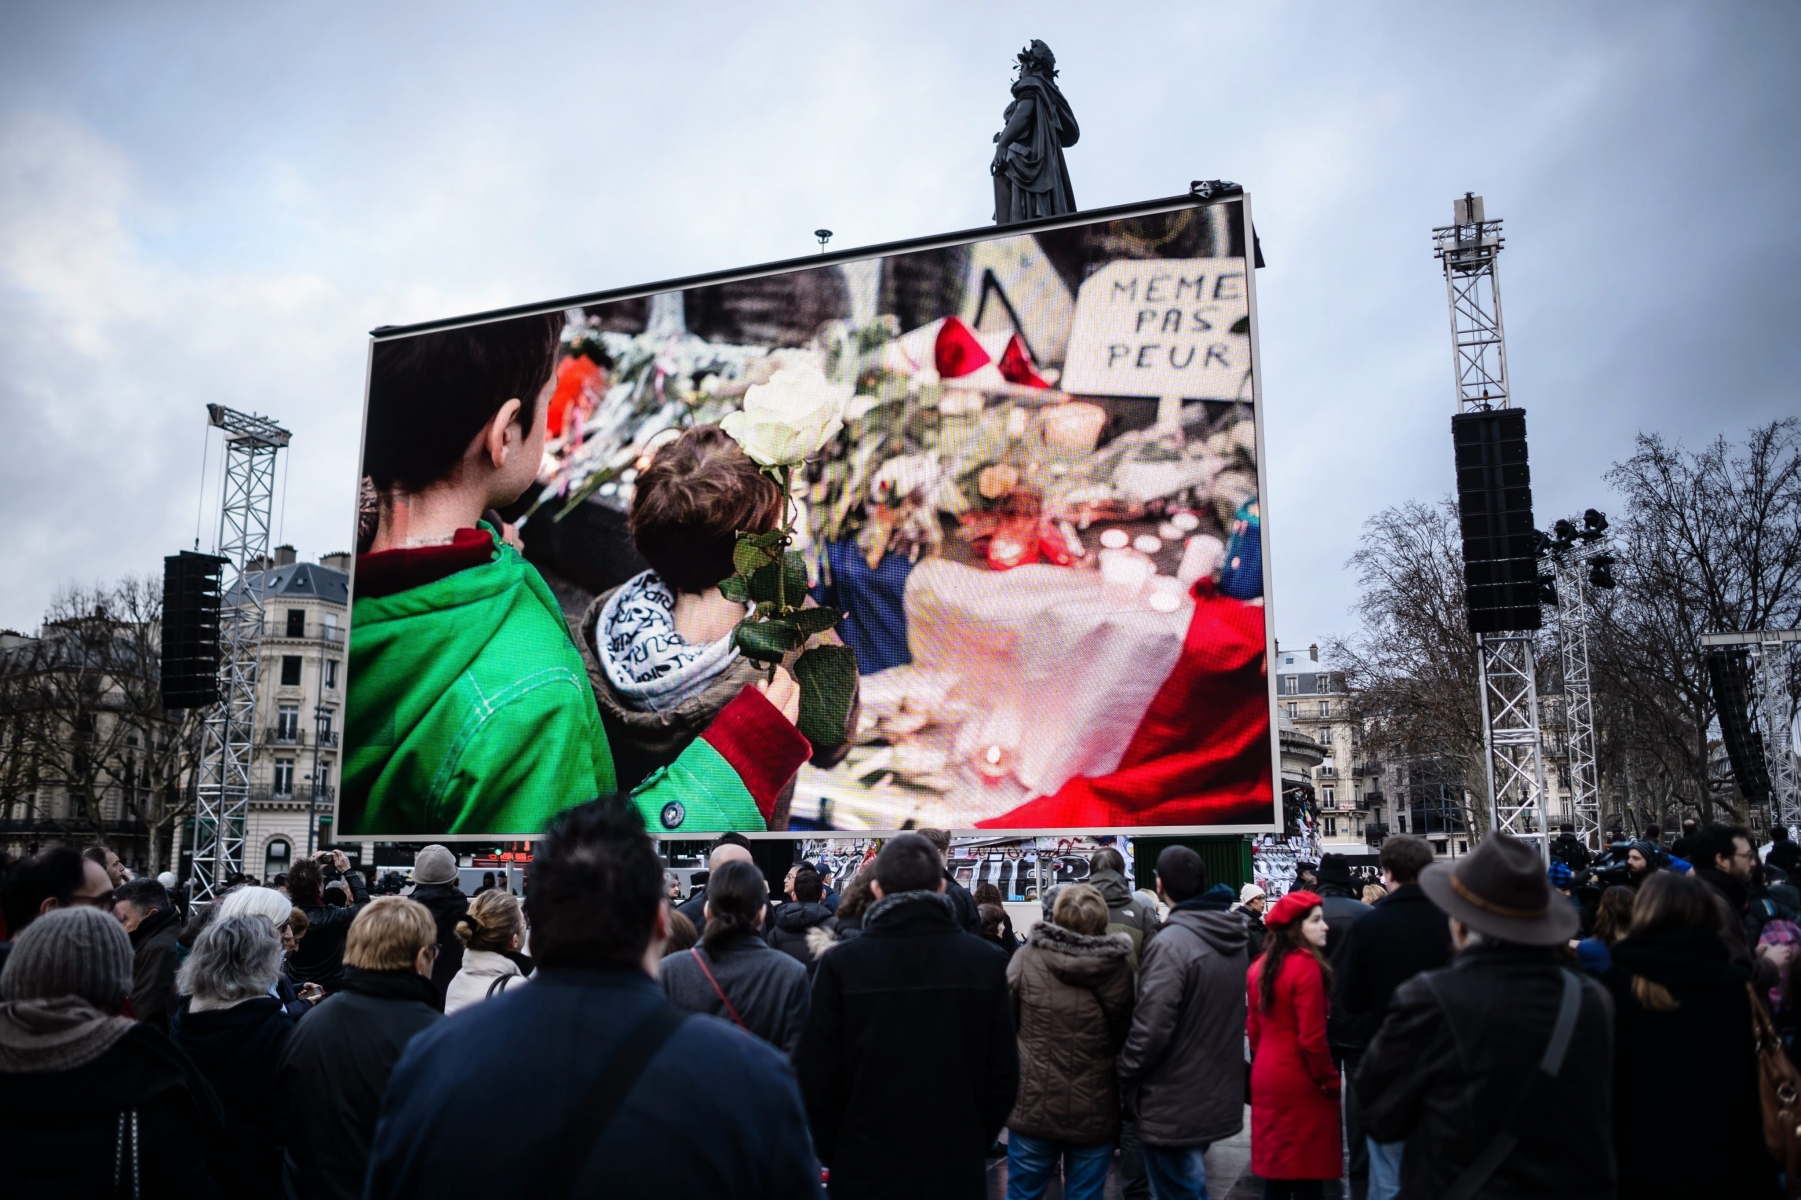 epa05095285 The gathered people watch a slide show on a screen at a ceremony to honor the victims of the terrorist attacks in 2015, at the Republic Square in Paris, France, 10 January 2016. France this week commemorates the victims of last year's Islamist militant attacks on satirical weekly Charlie Hebdo and a Jewish HyperCacher supermarket.  EPA/CHRISTOPHE PETIT TESSON FRANCE ATTACKS ANNIVERSARY